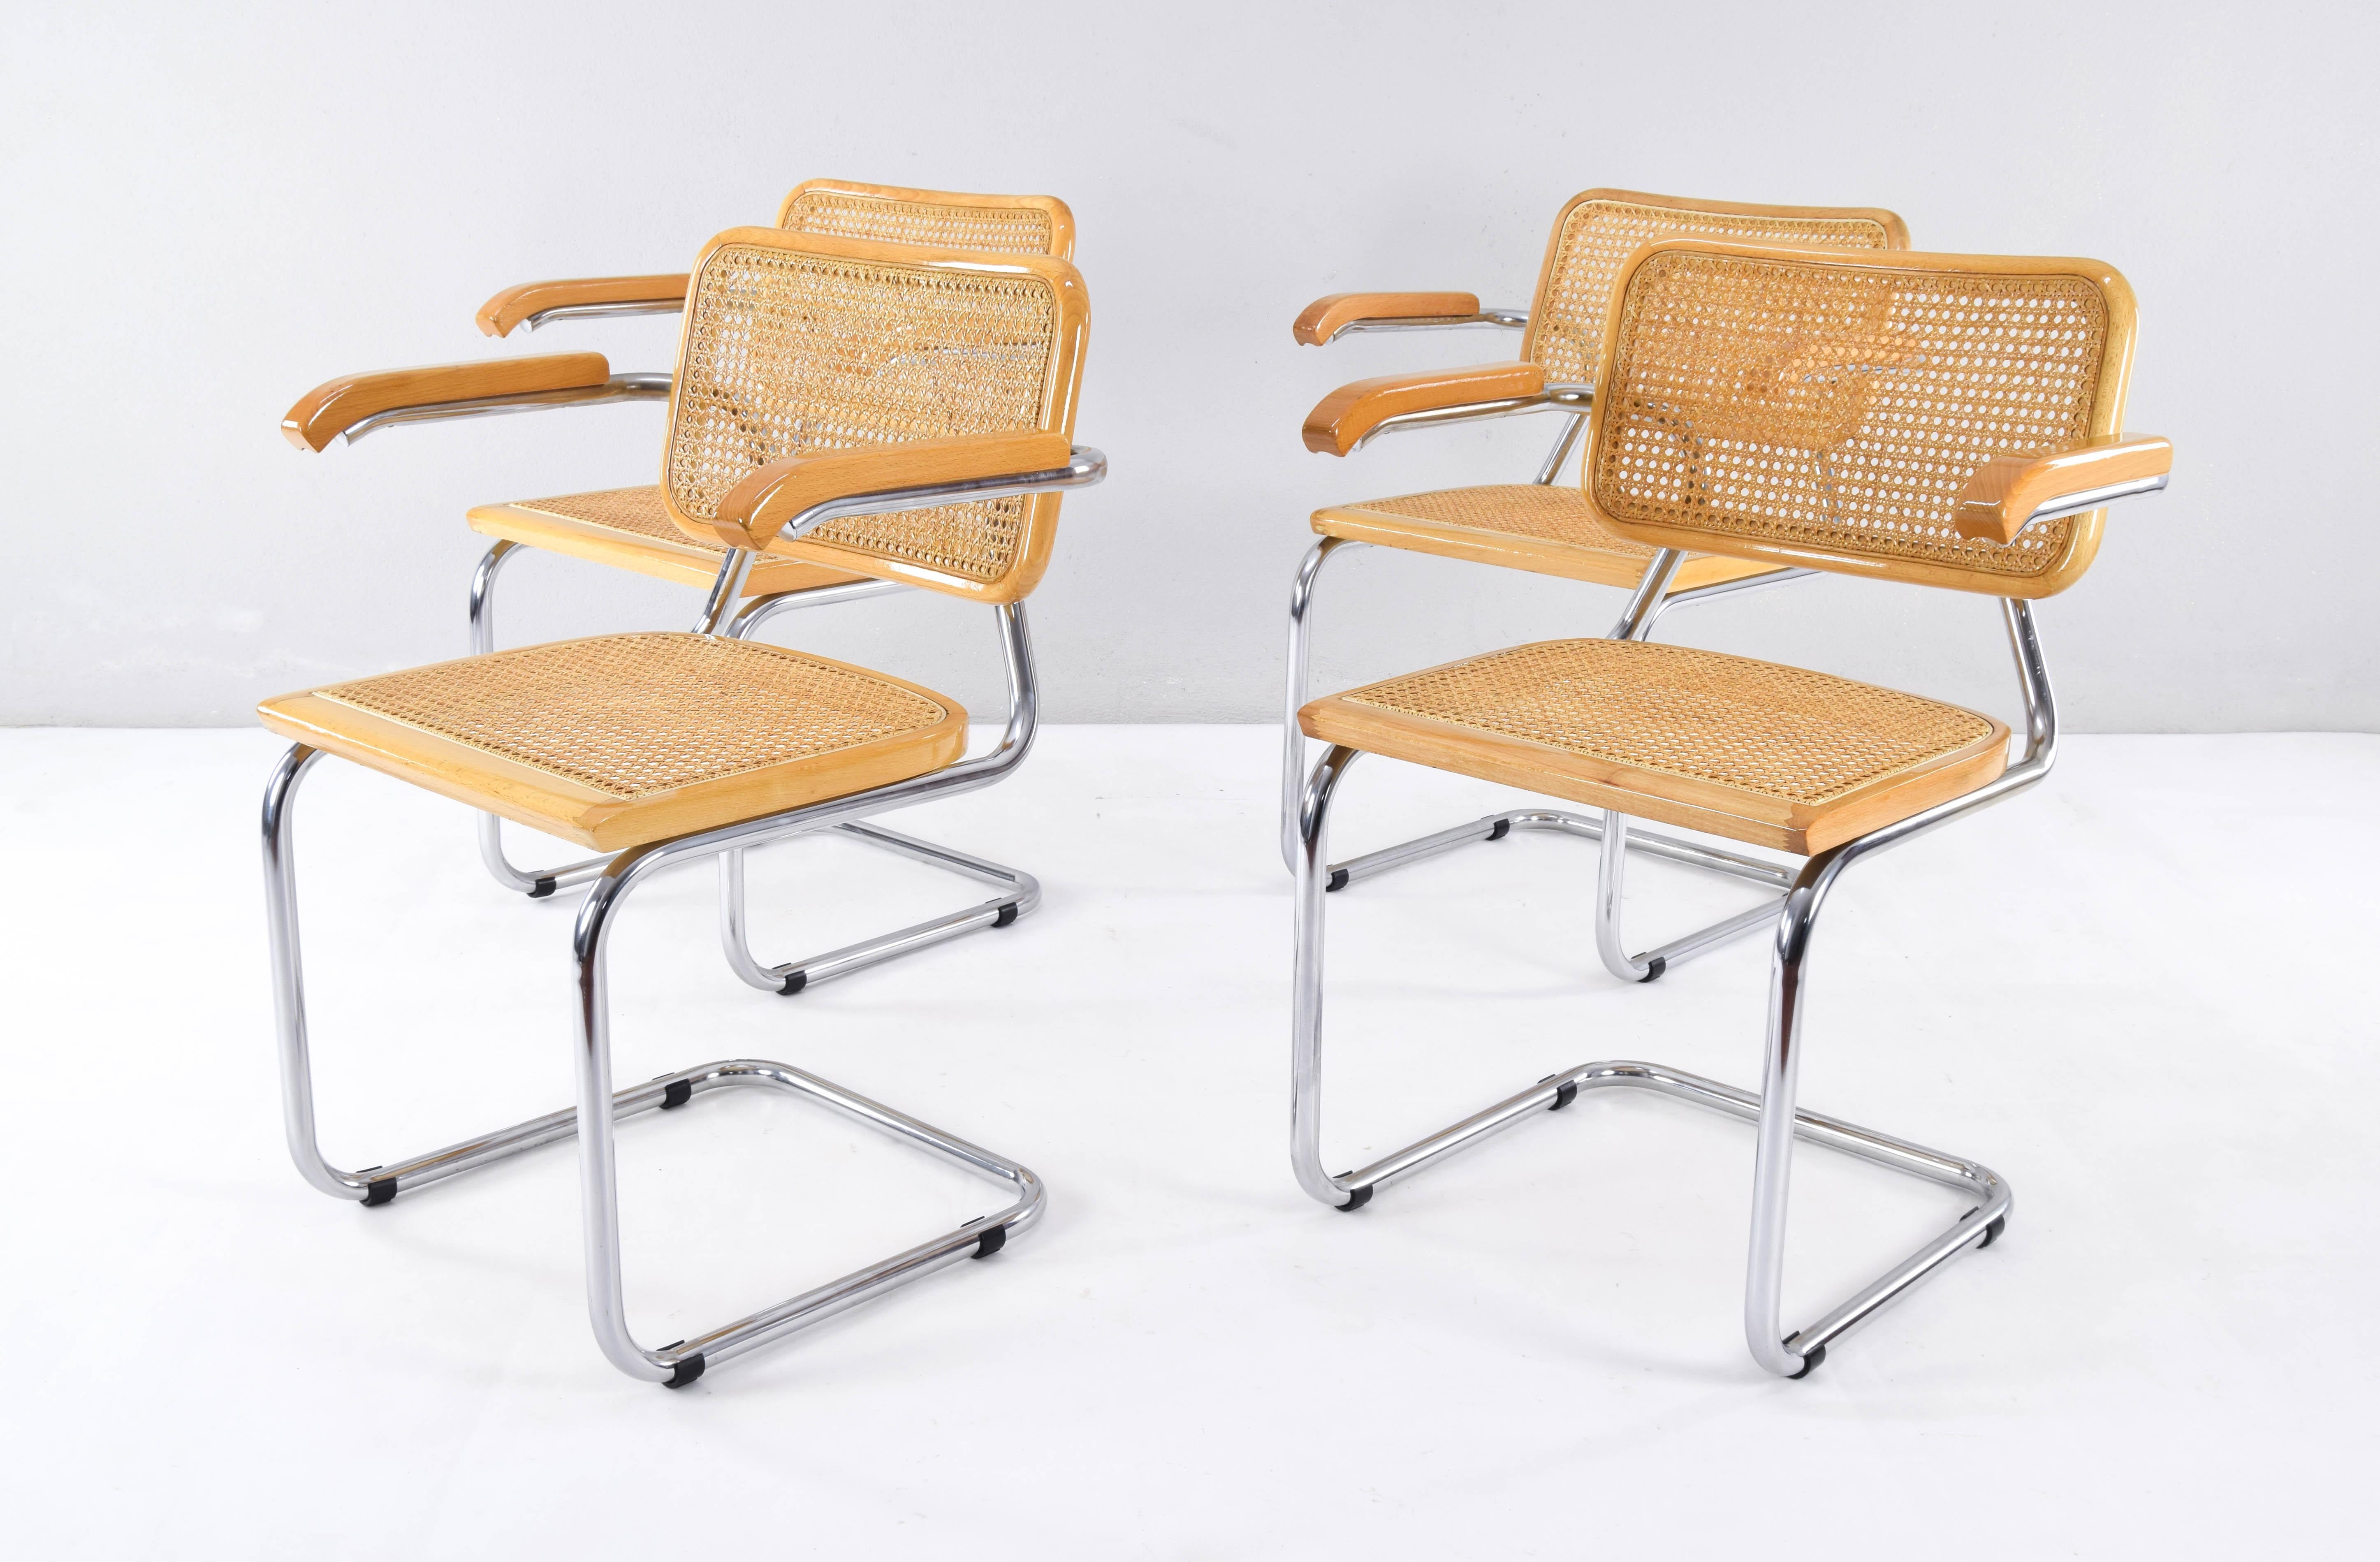 Set of four Cesca chairs model B64, made in Italy in the 1980s. Tubular structure in chromed steel, beech wood frames natural finish and Viennese natural grid.
The grids on all four seats have been replaced with new grids.

Measurements:
Total